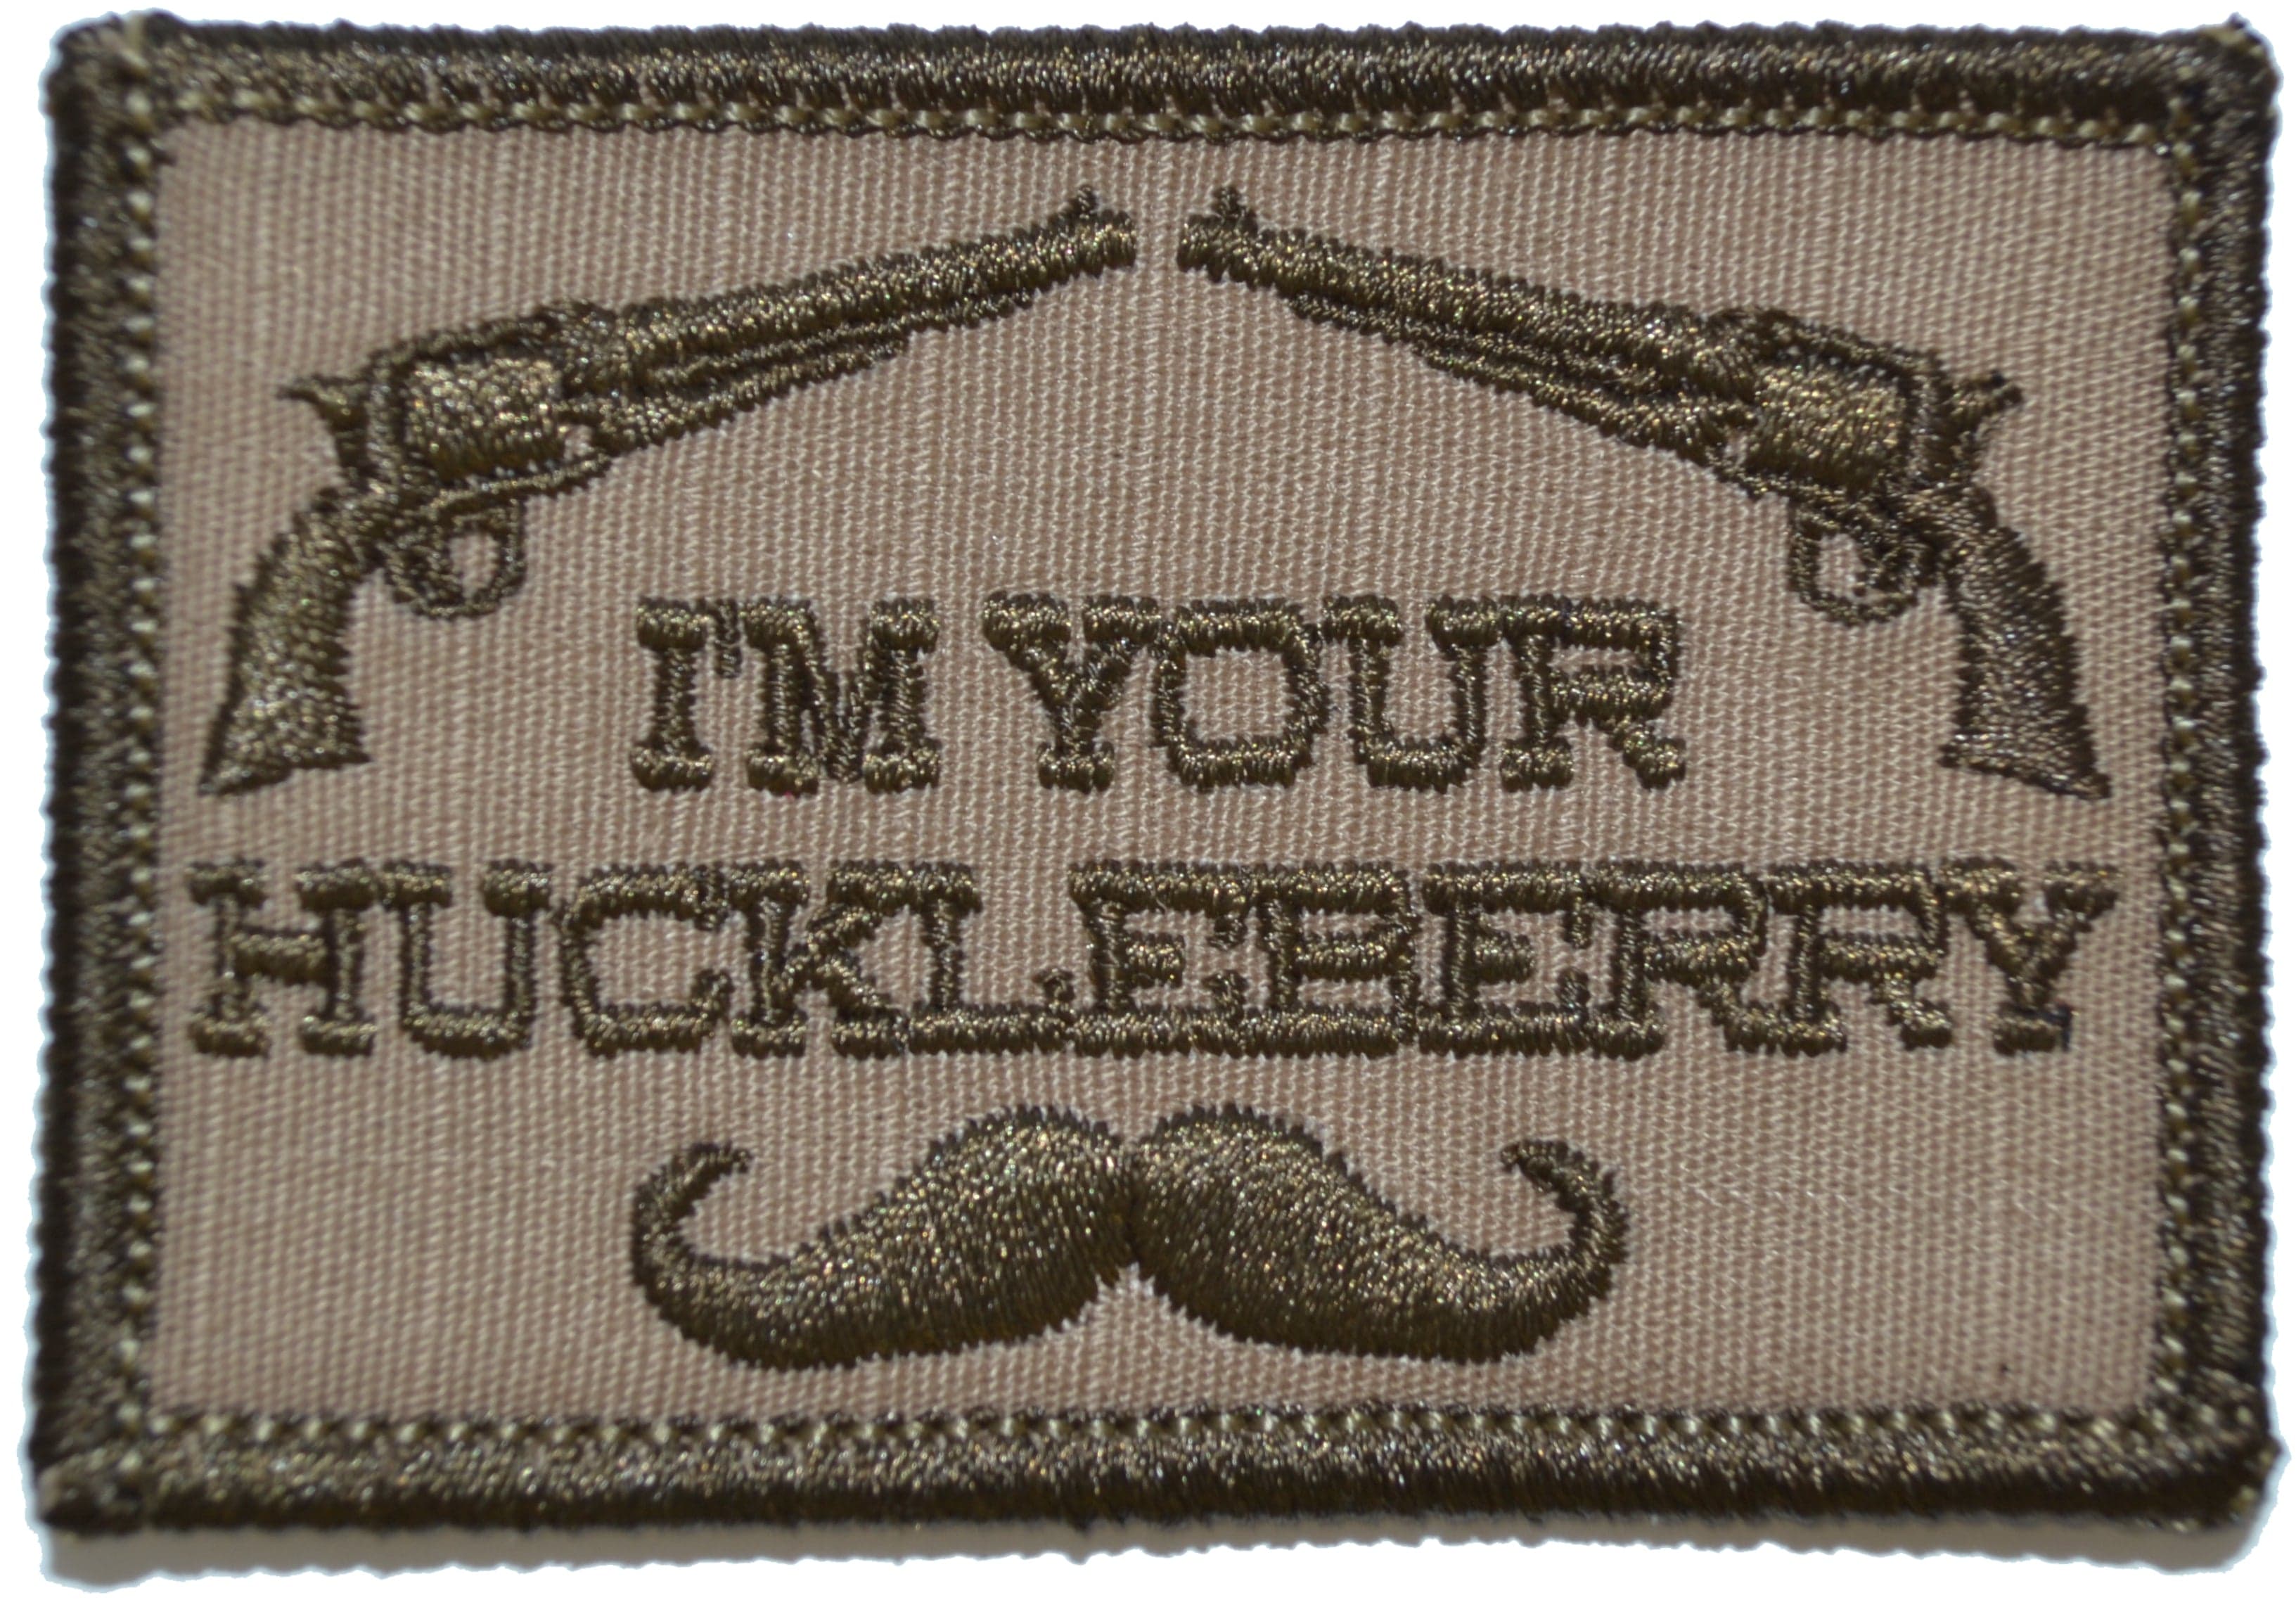 FAFO I'm Your Huckleberry - PVC Patch